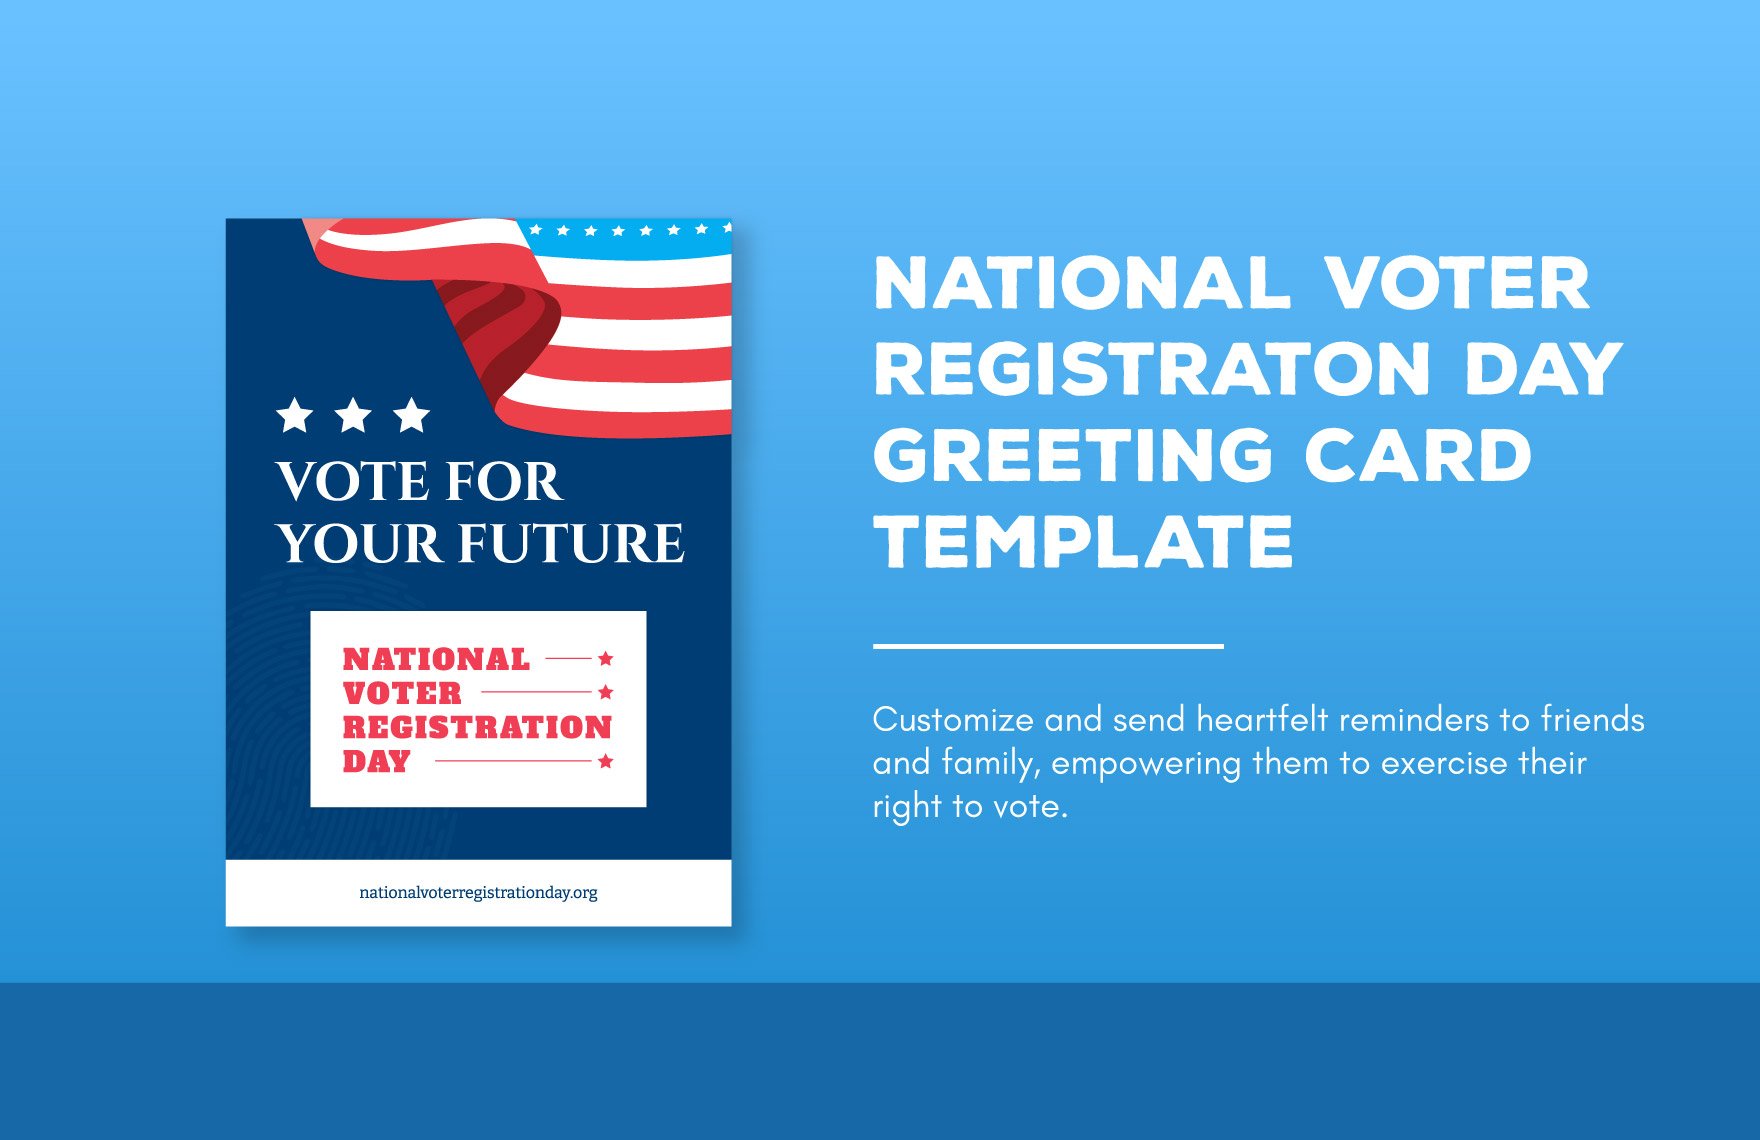 Free National Voter Registration Day Greeting Card Template in Illustrator, PSD, PNG